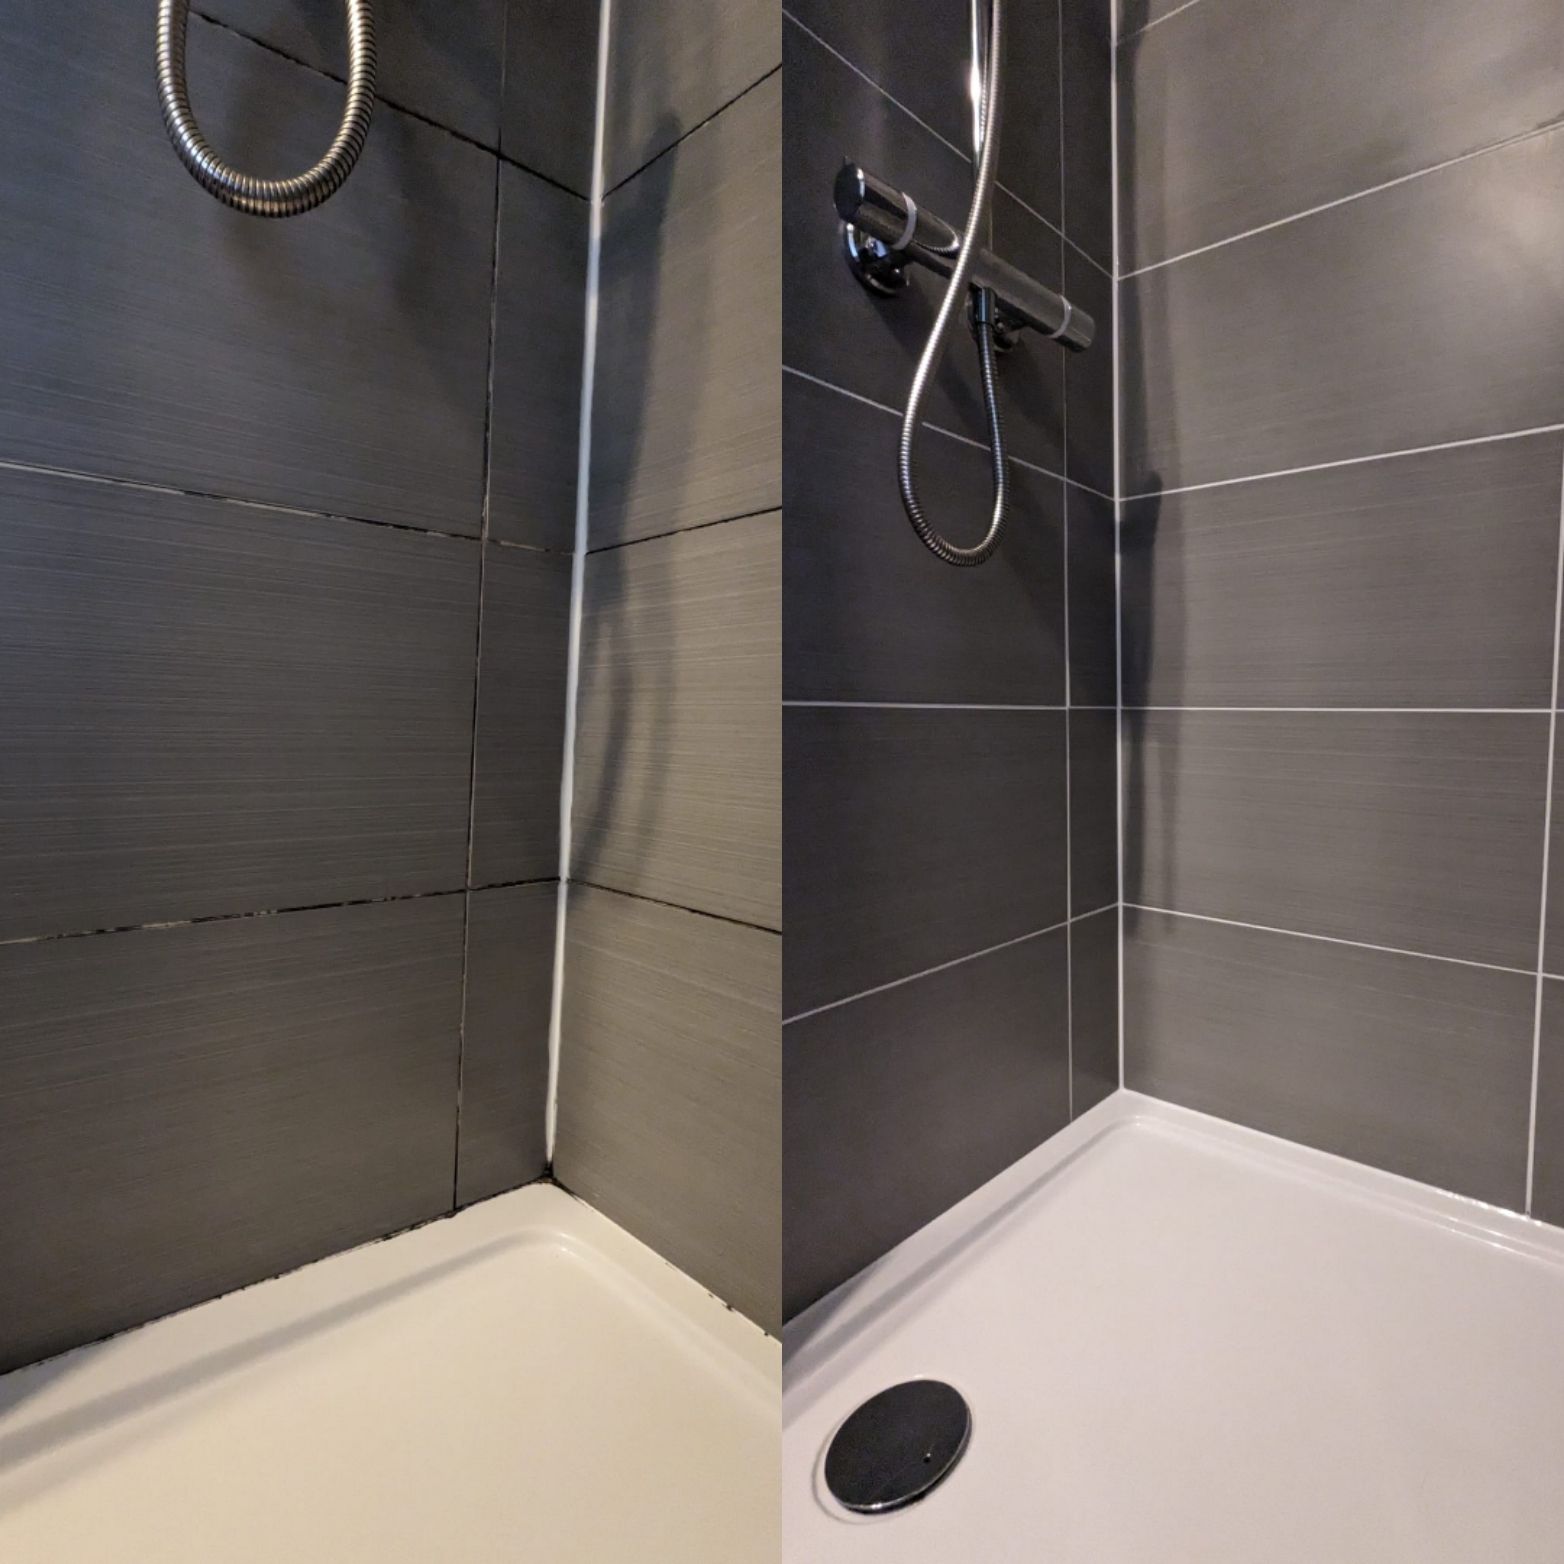 SHOWER AND BATH AREA RESTORATION with mouldy silicone sealant and dicoloured grout IN MANCHESTER, GREATER MANCHESTER